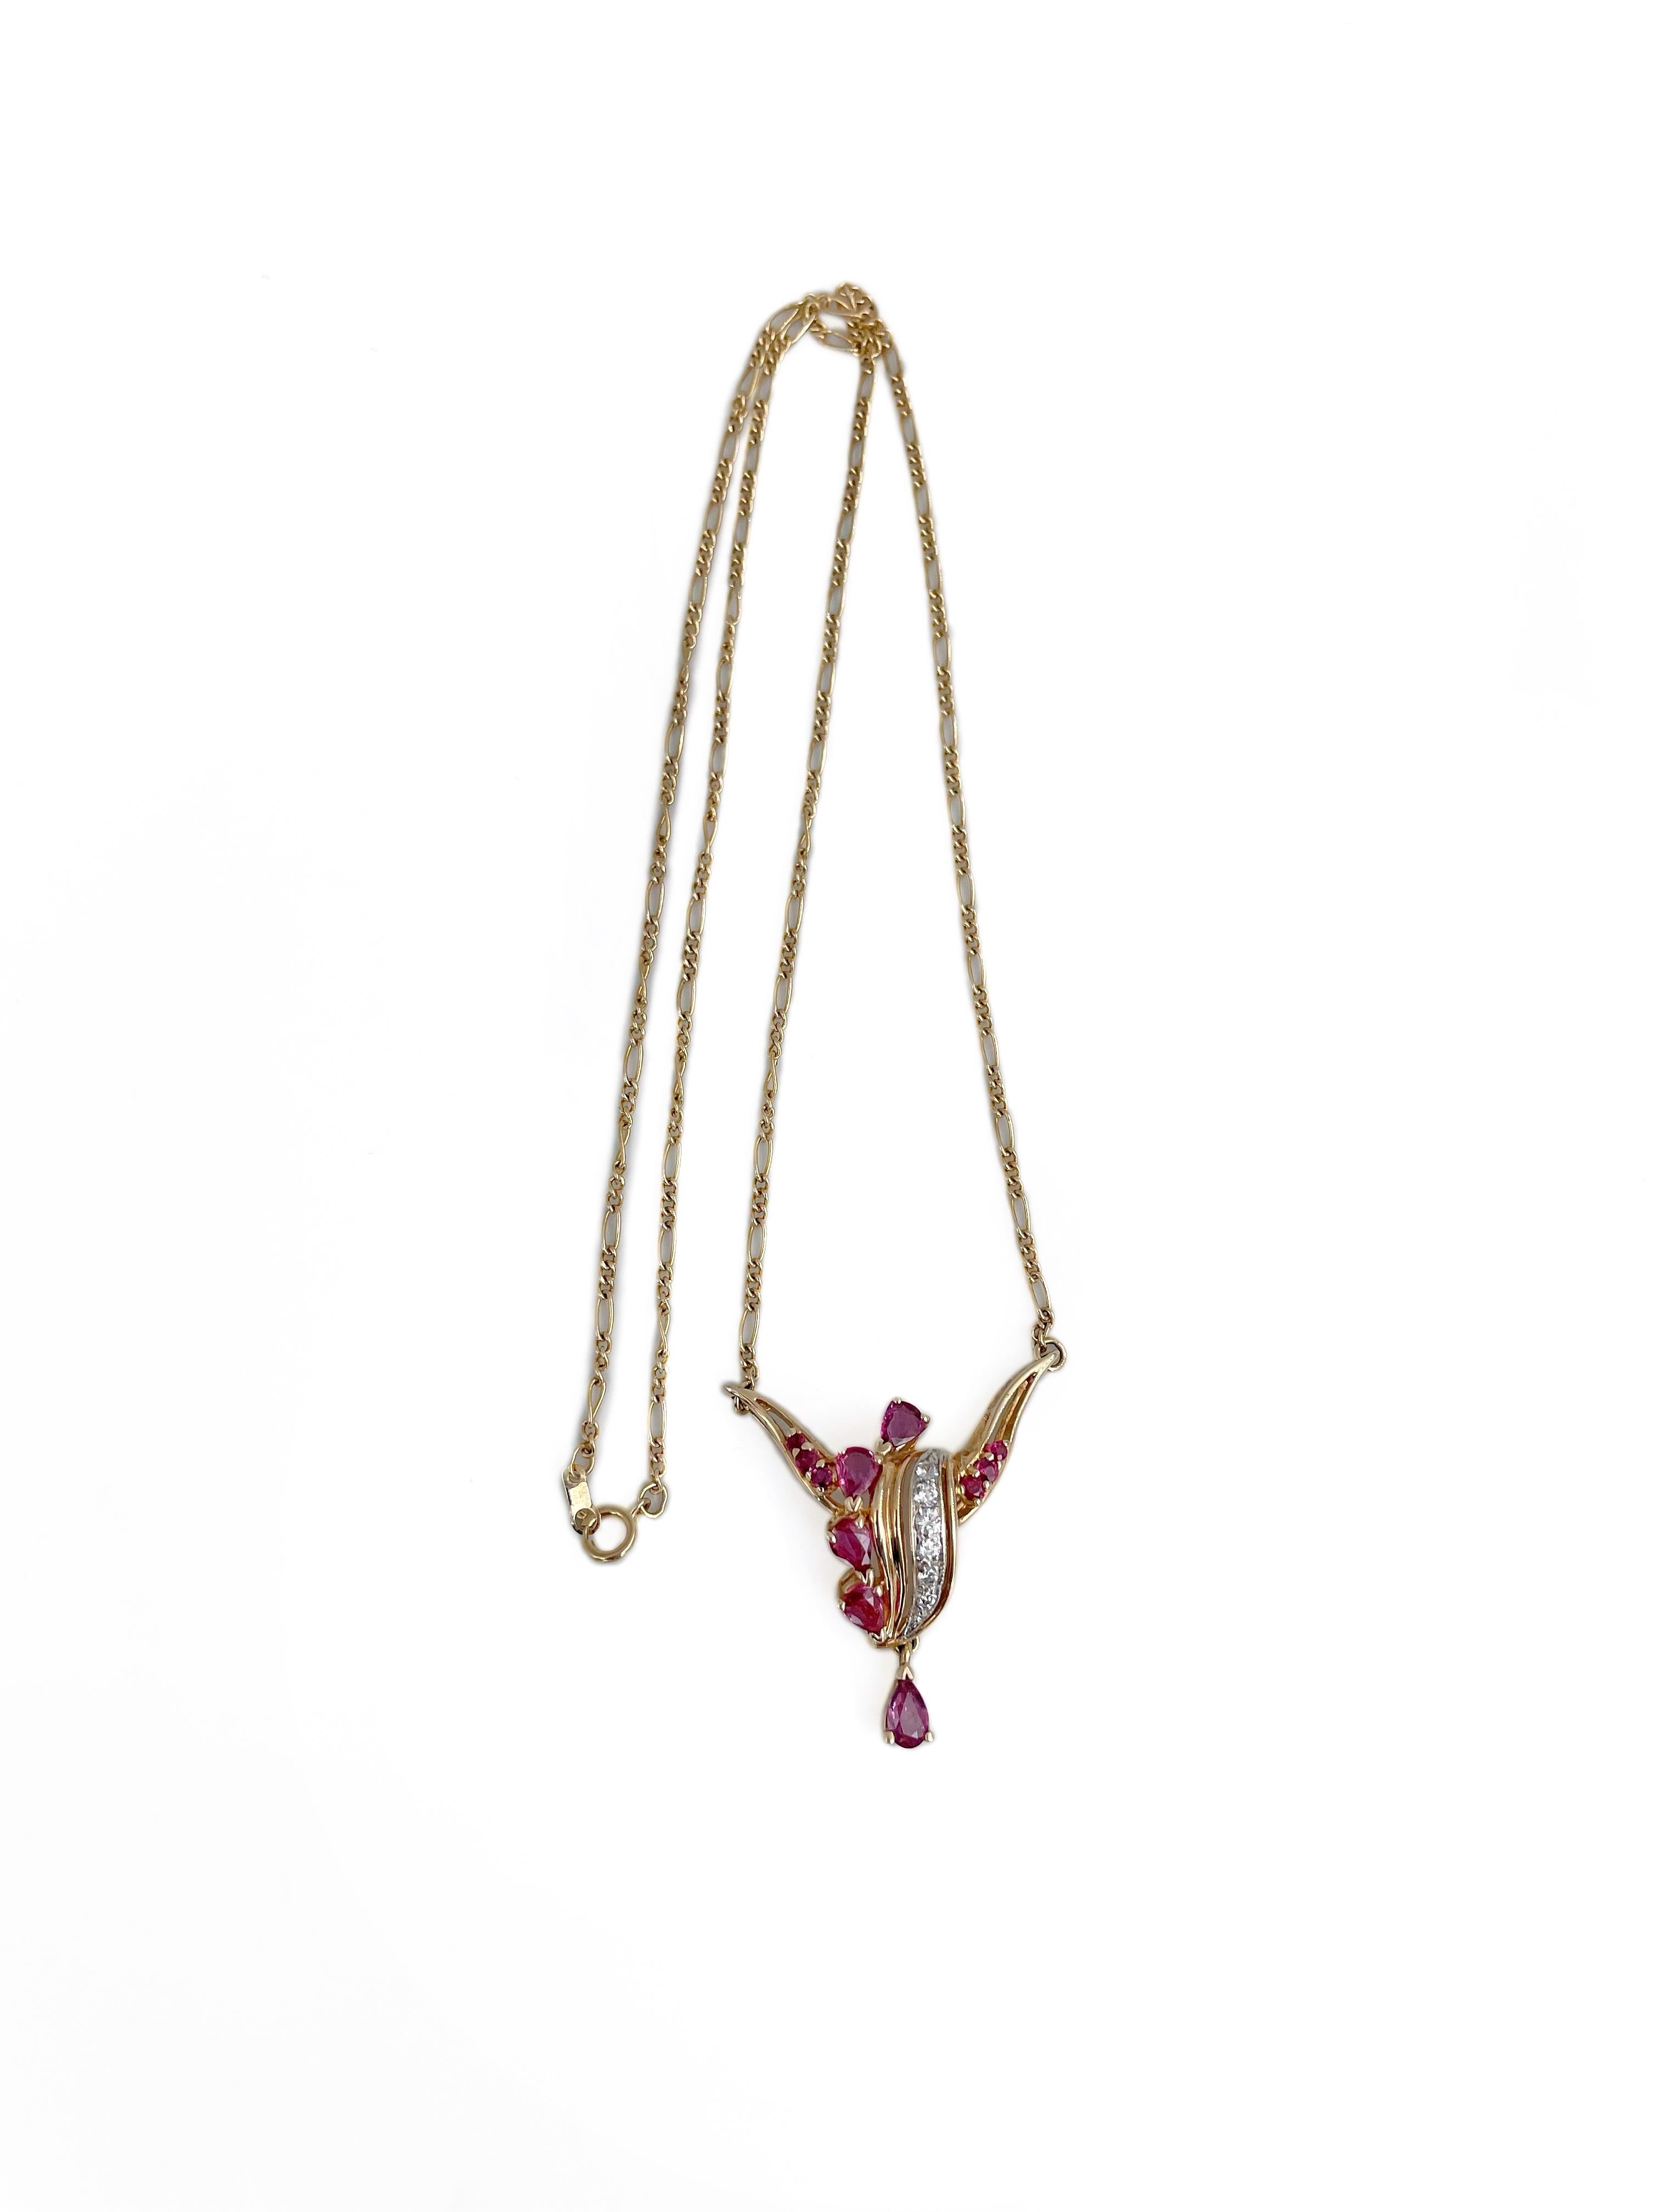 This is a vintage collier necklace crafted in 14K yellow gold. Circa 1980. 

The piece features:
- 11 rubies (round and pear cut, TW 1.10ct, slpR 5/4-6/3, VS-SI)
- 6 diamonds (round brilliant cut, TW 0.10ct, RW+/W, VS-SI)

Weight: 5.68g
Pendant